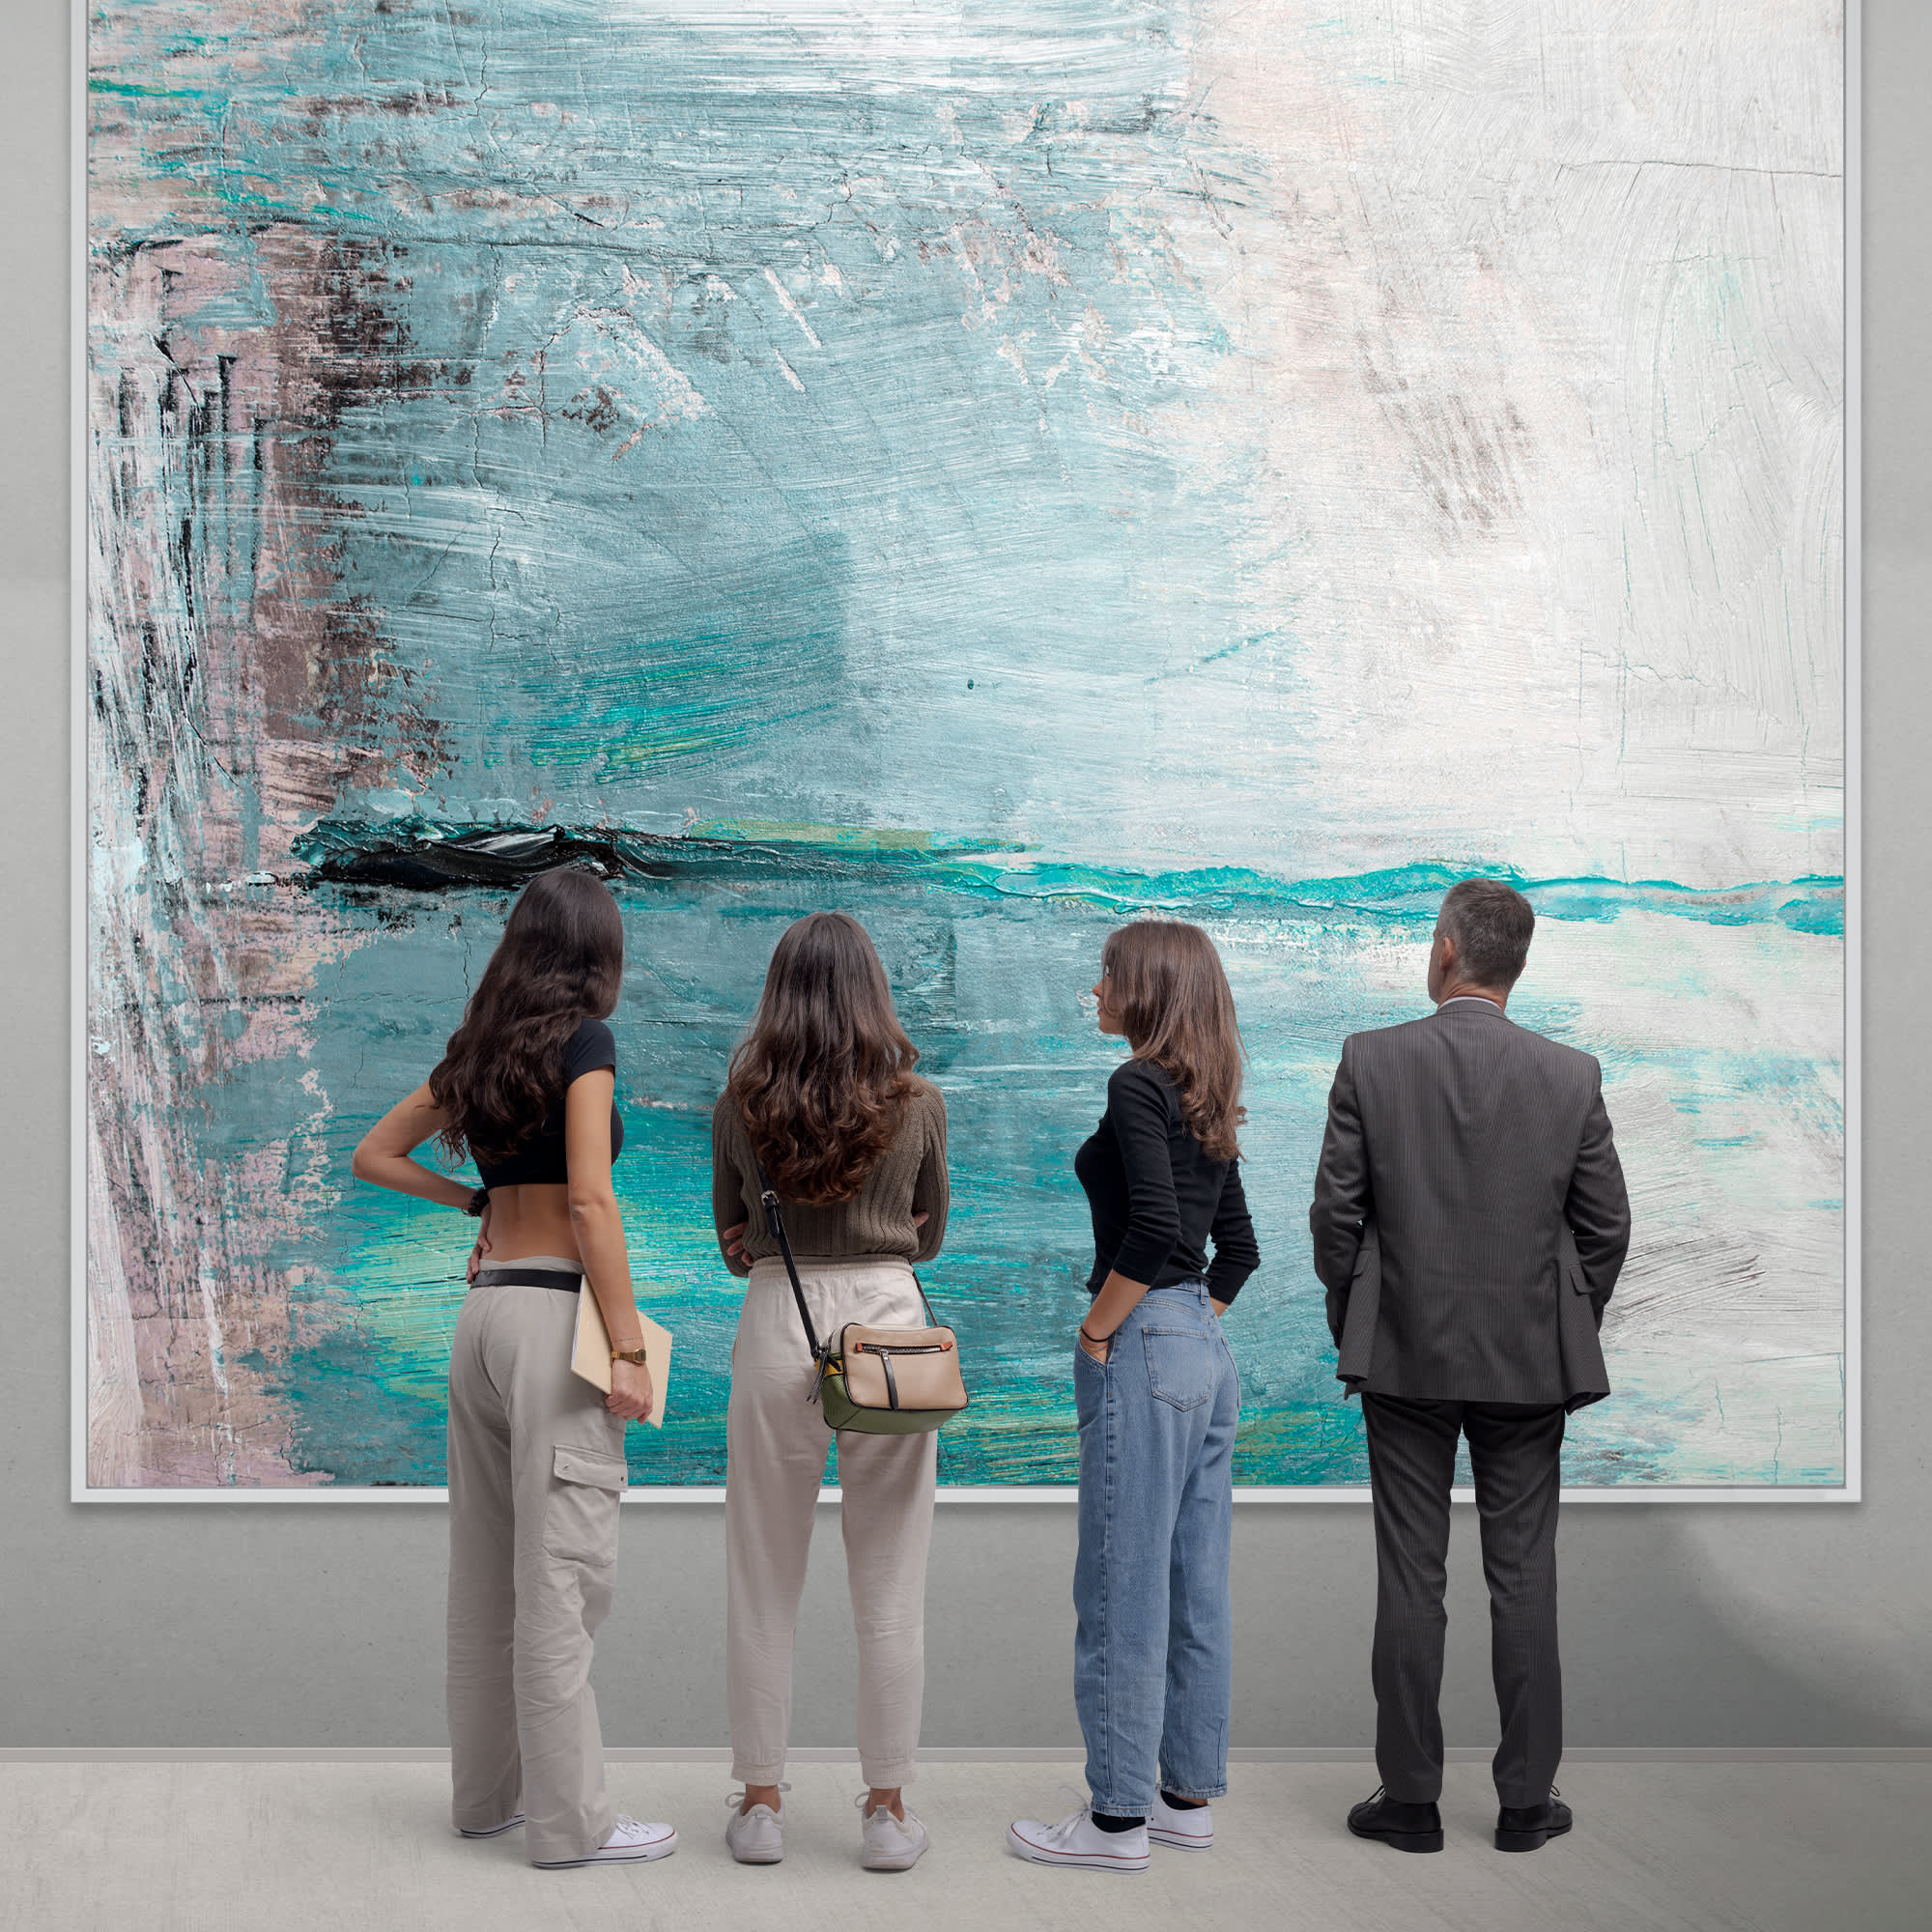 Explore the vibrant art scene in New York with our guide to the best galleries and museums. From contemporary exhibitions to historical collections, there's something to suit every taste. Immerse yourself in culture and discover the beauty of art at these must-see destinations.